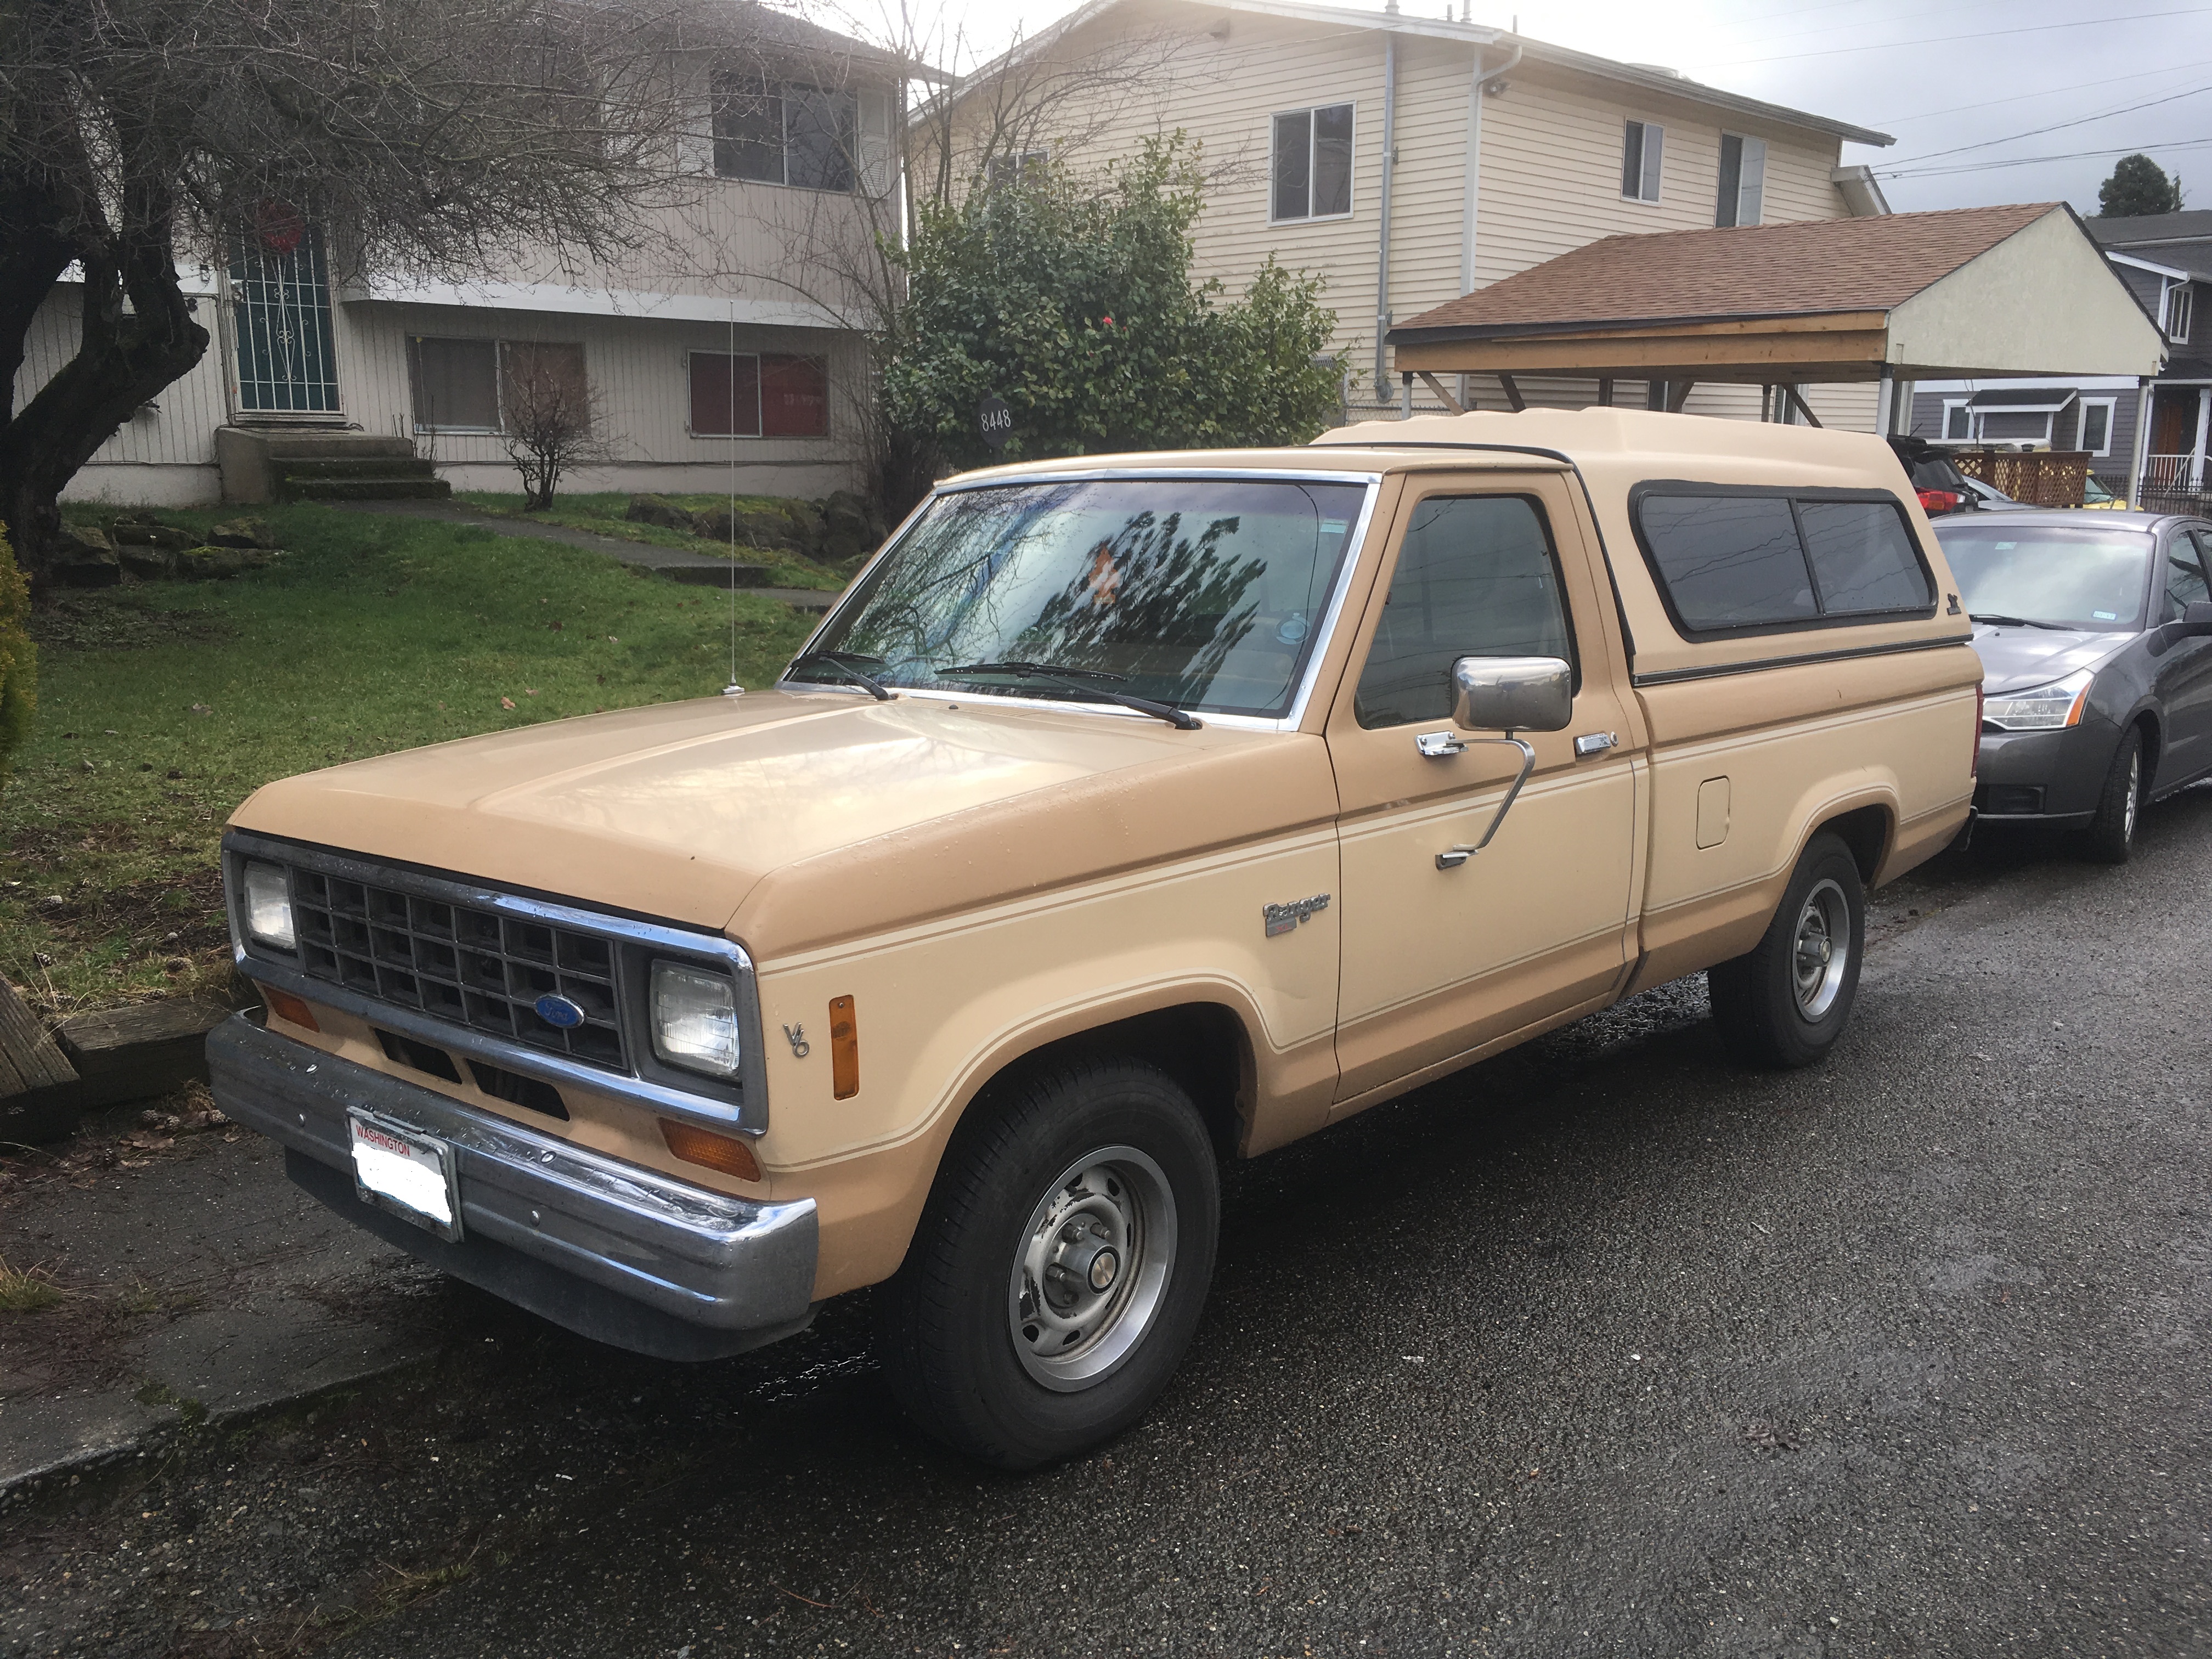 For Sale: 1984 Ford Ranger XL For Sale, Seattle, WA 